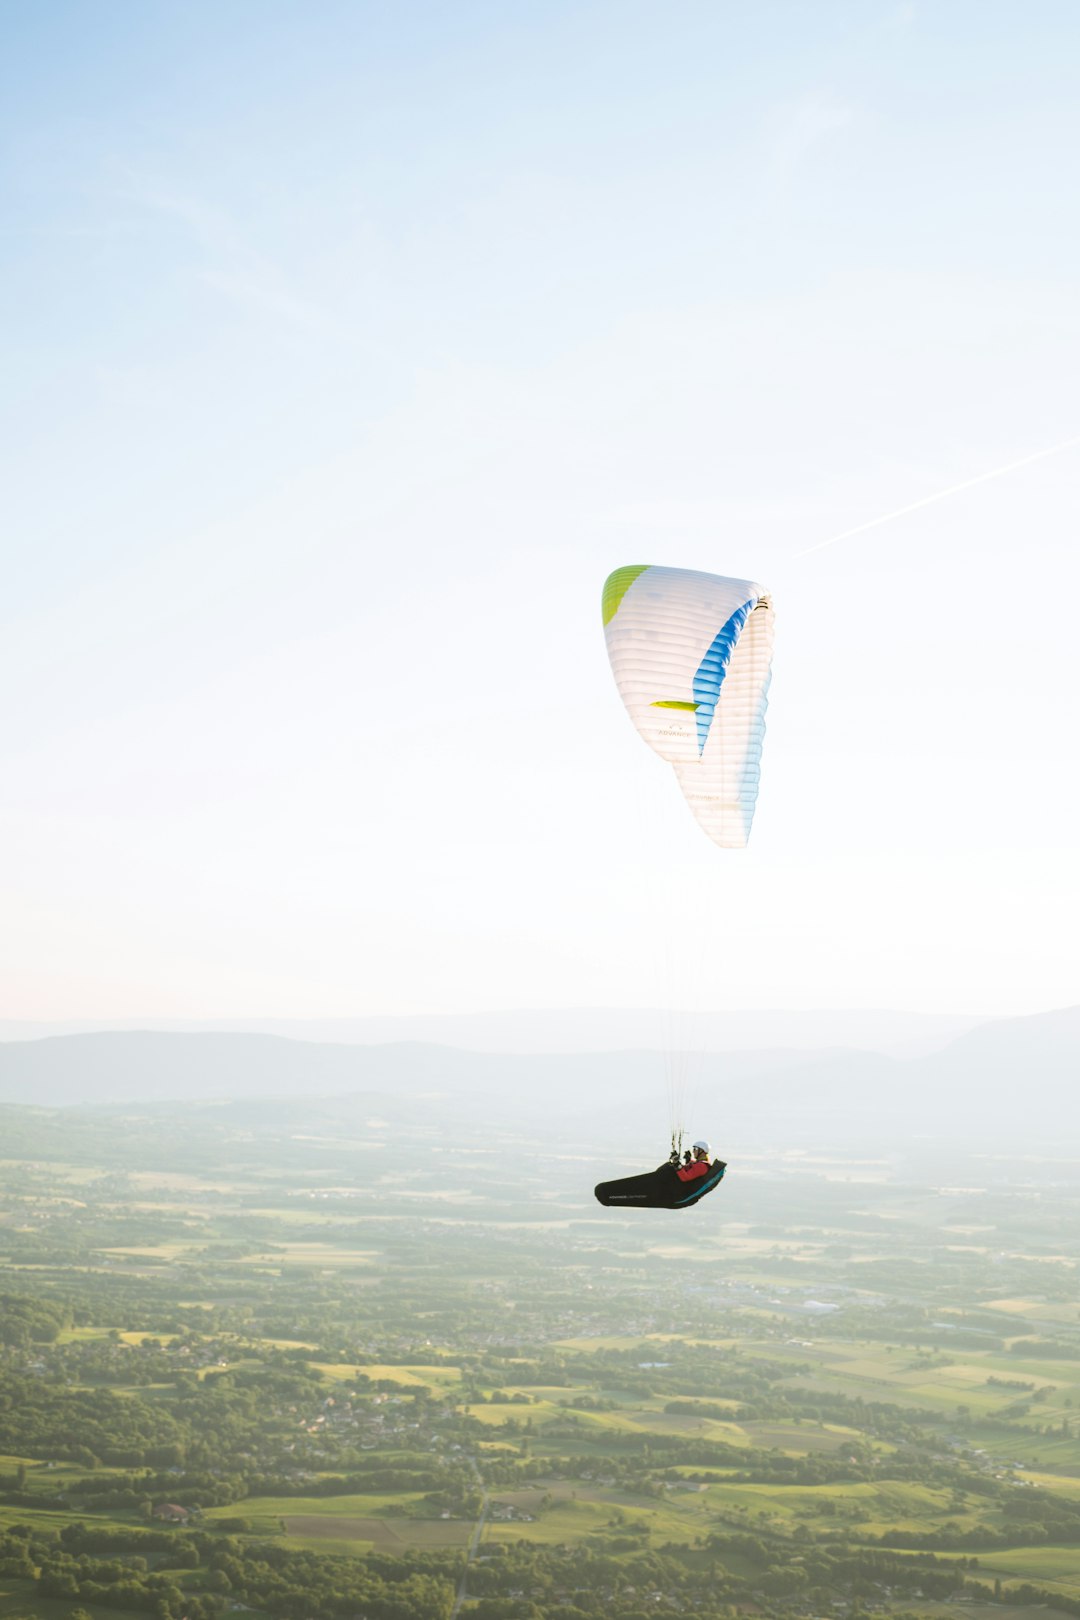 travelers stories about Paragliding in Salève, France